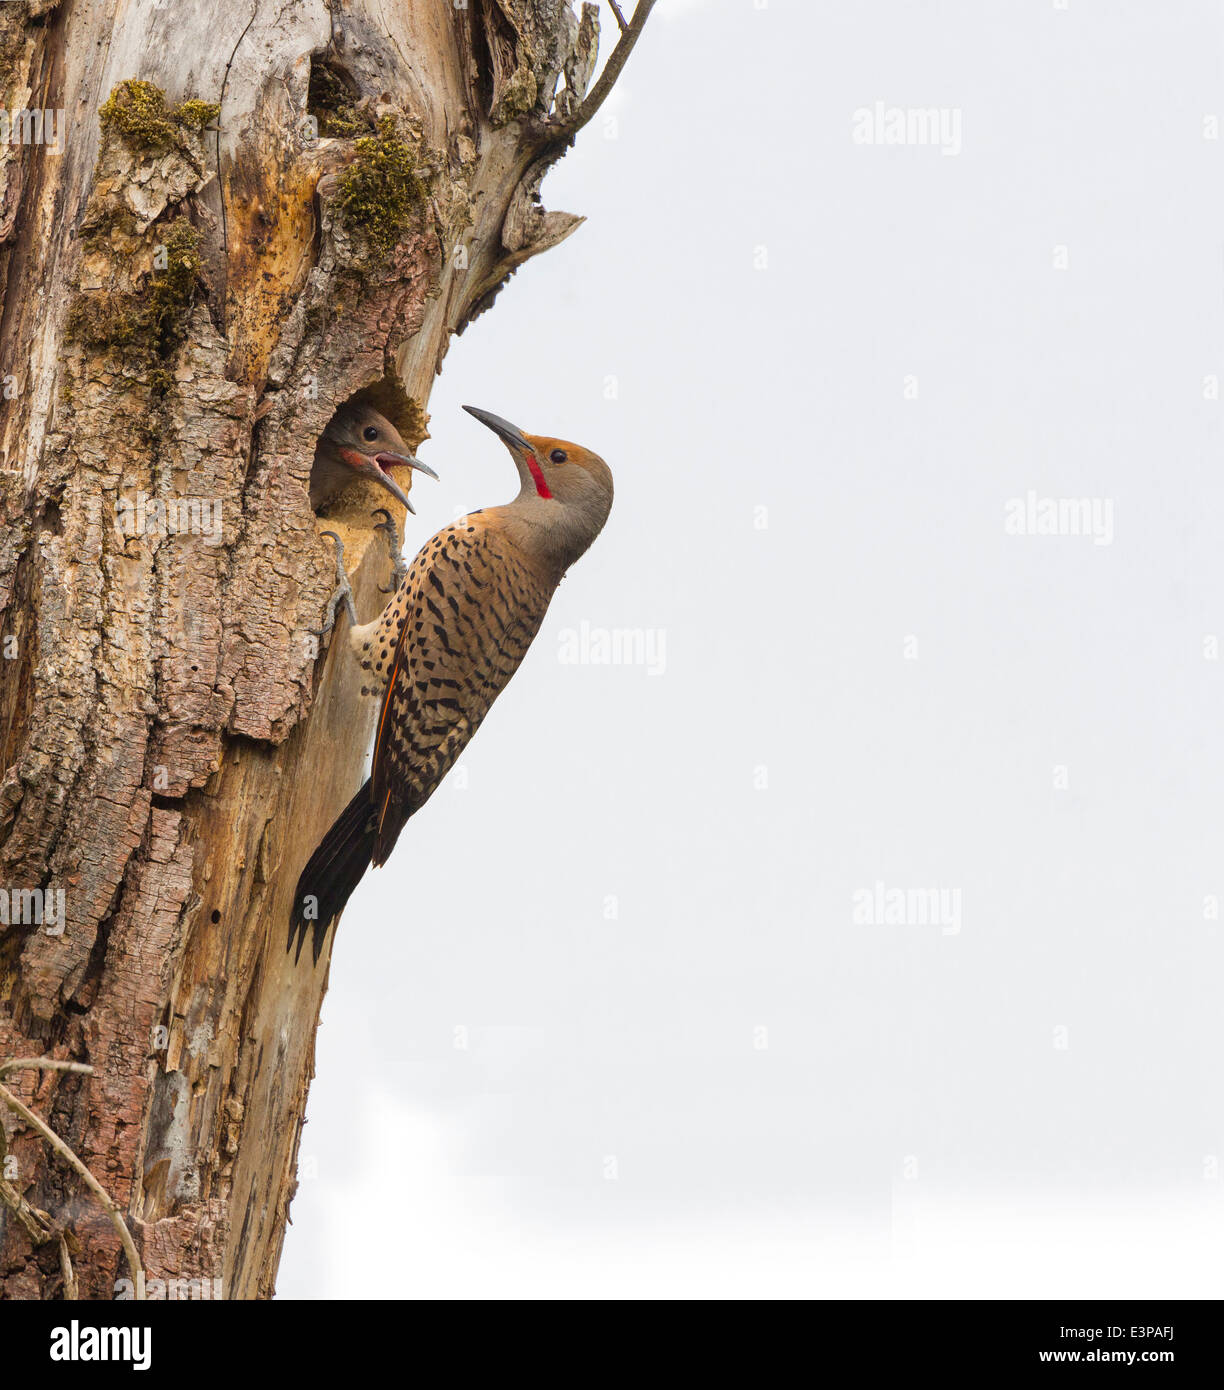 USA, Washington State. Male Northern Flicker (Colaptes auratus) at nest, with chick in nest hole. Kirkland, WA. Stock Photo